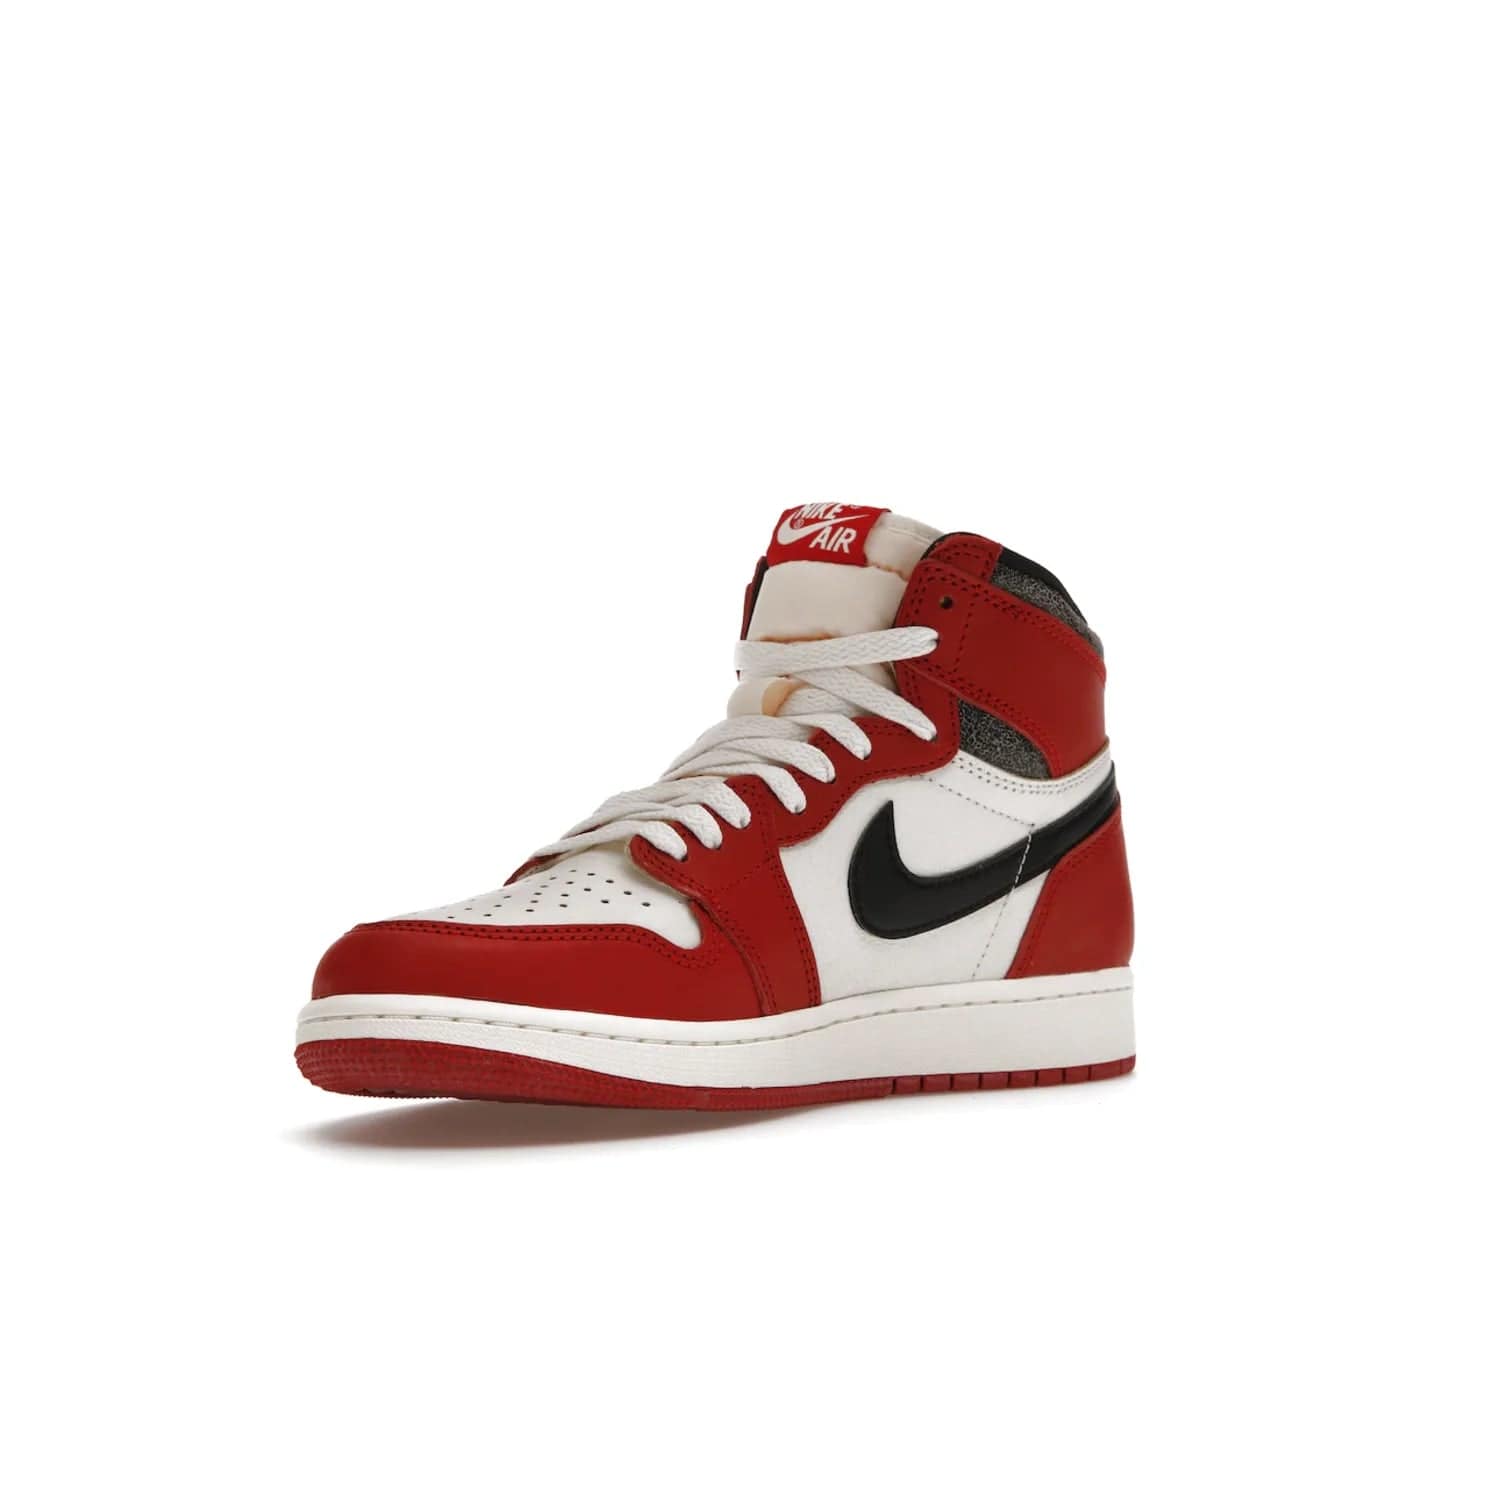 Jordan 1 Retro High OG Chicago Lost and Found (GS) - Image 15 - Only at www.BallersClubKickz.com - Grab the Air Jordan 1 Retro High OG Chicago Reimagined GS, presenting in classic 1985 silhouette. Varsity Red, Black, Muslin and Sail hues, featuring Nike Air branding, Wings on the collars and printed insoles. Don't miss out when it releases 19th Nov 2022.